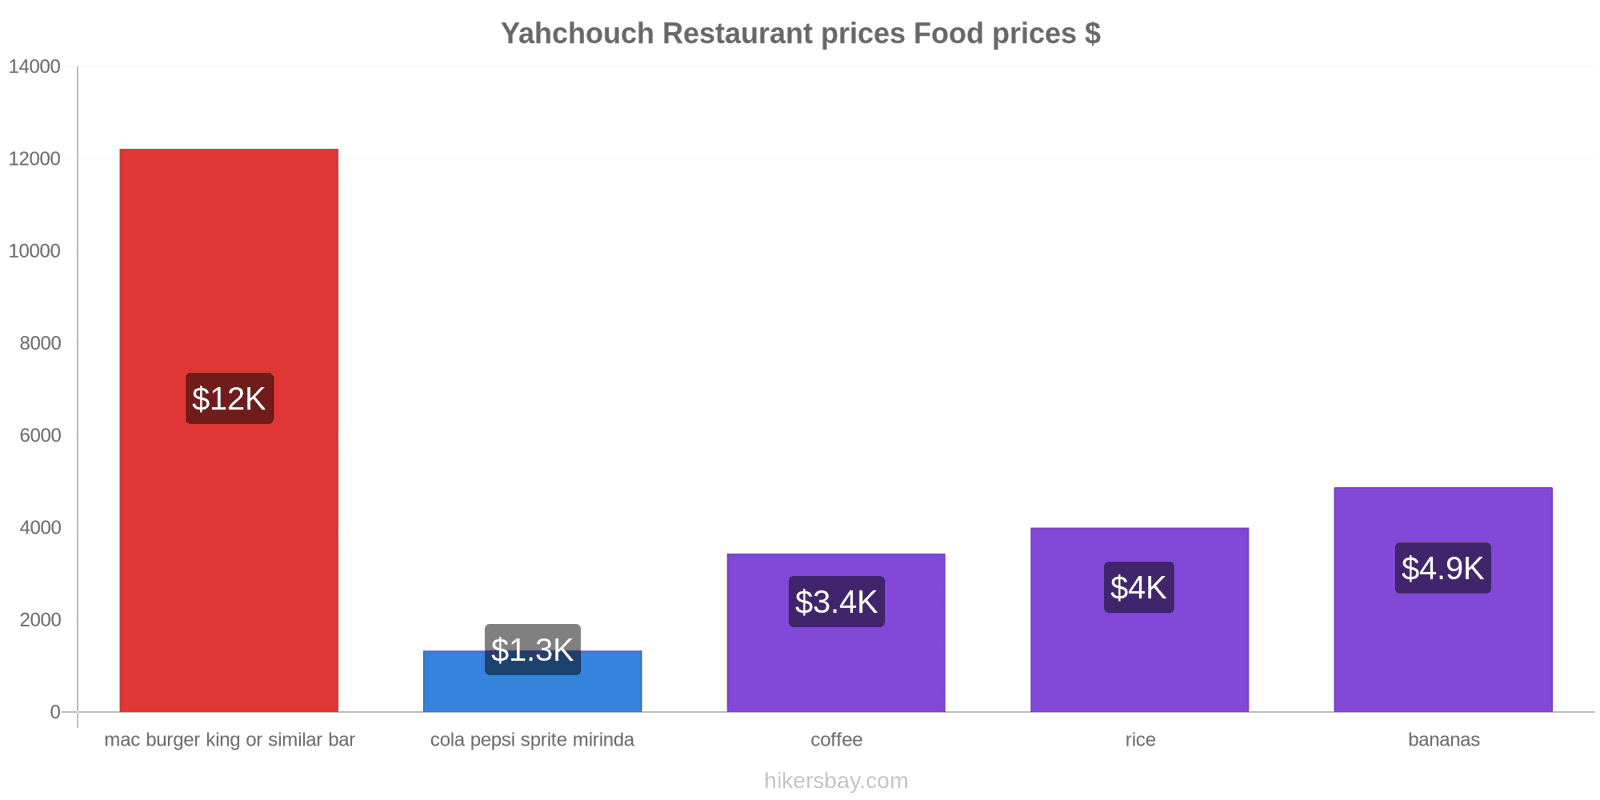 Yahchouch price changes hikersbay.com